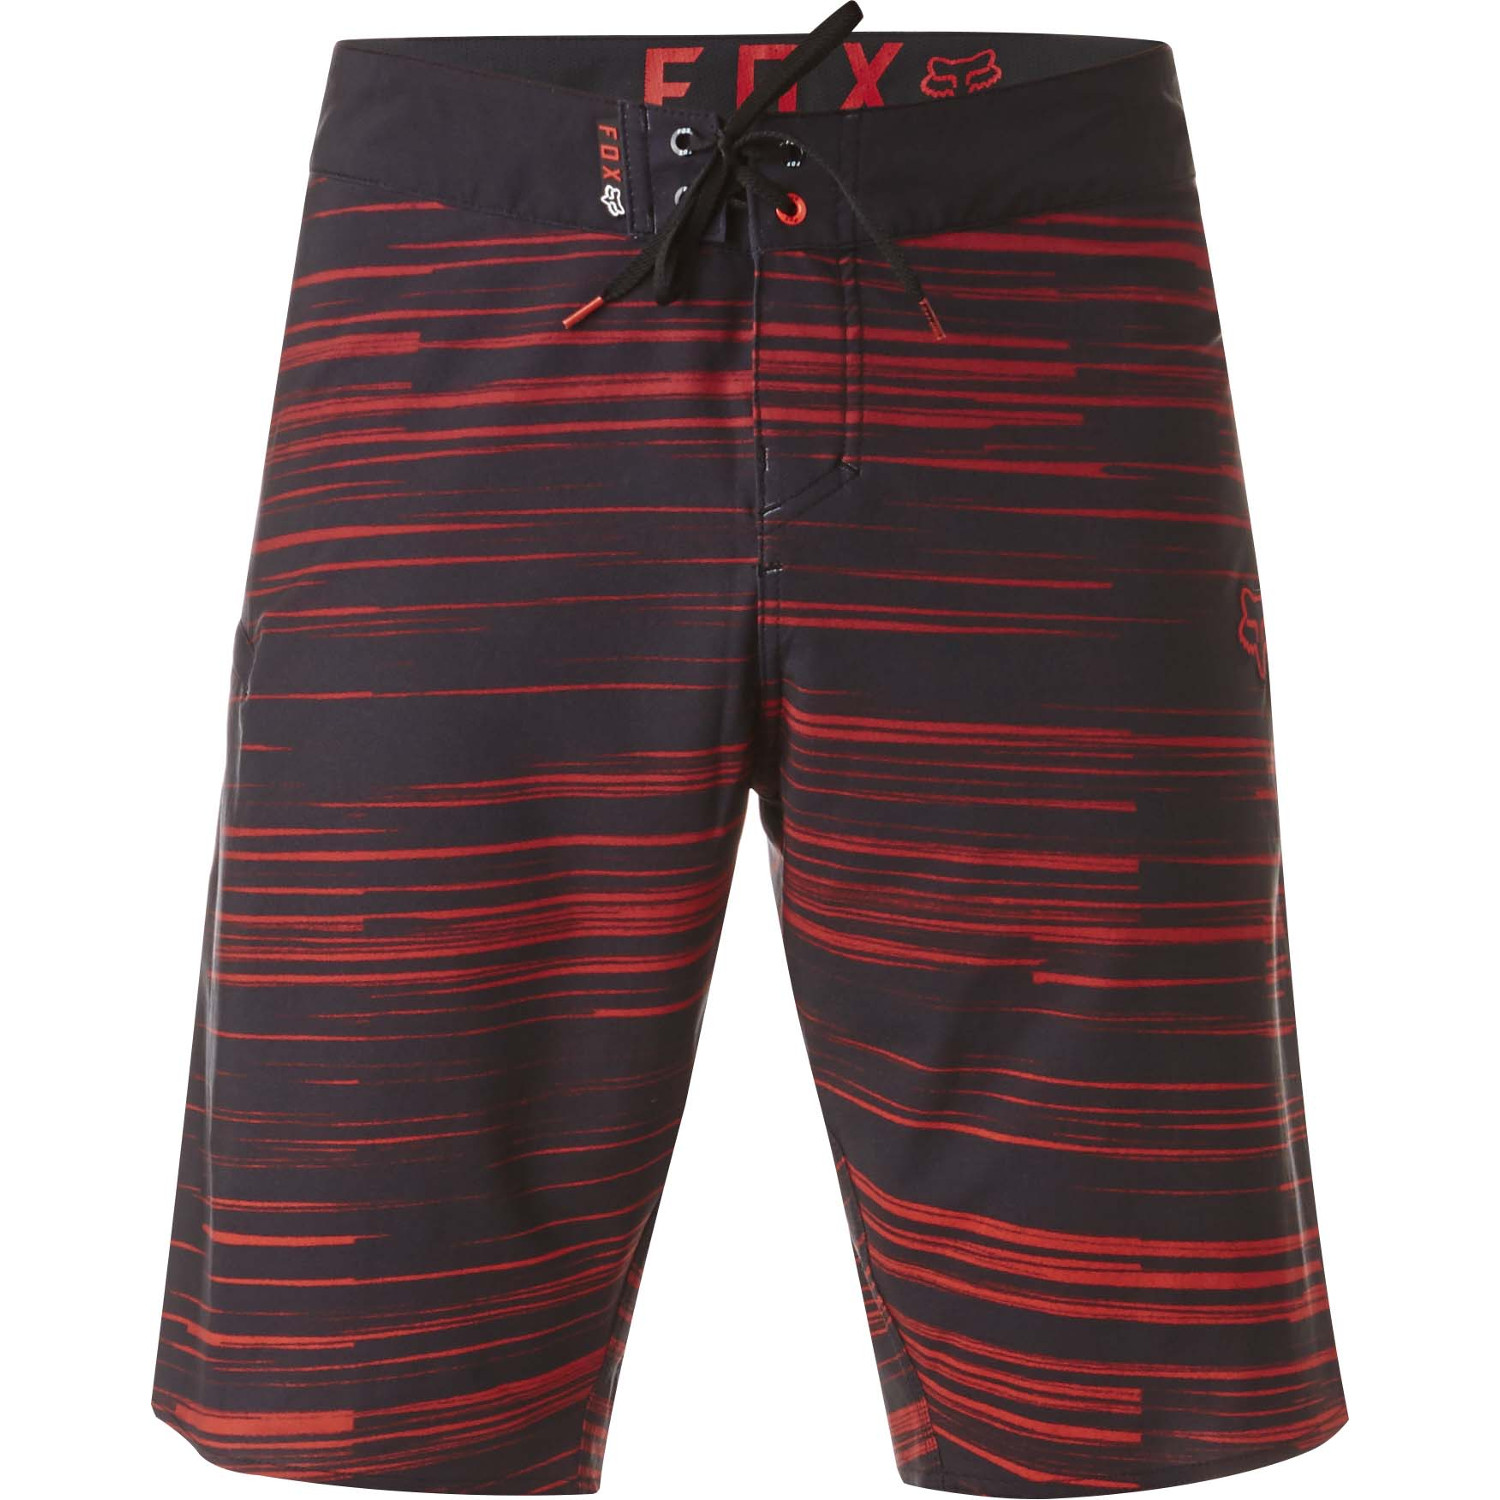 Fox Shorts da Mare Motion Static Flame Red